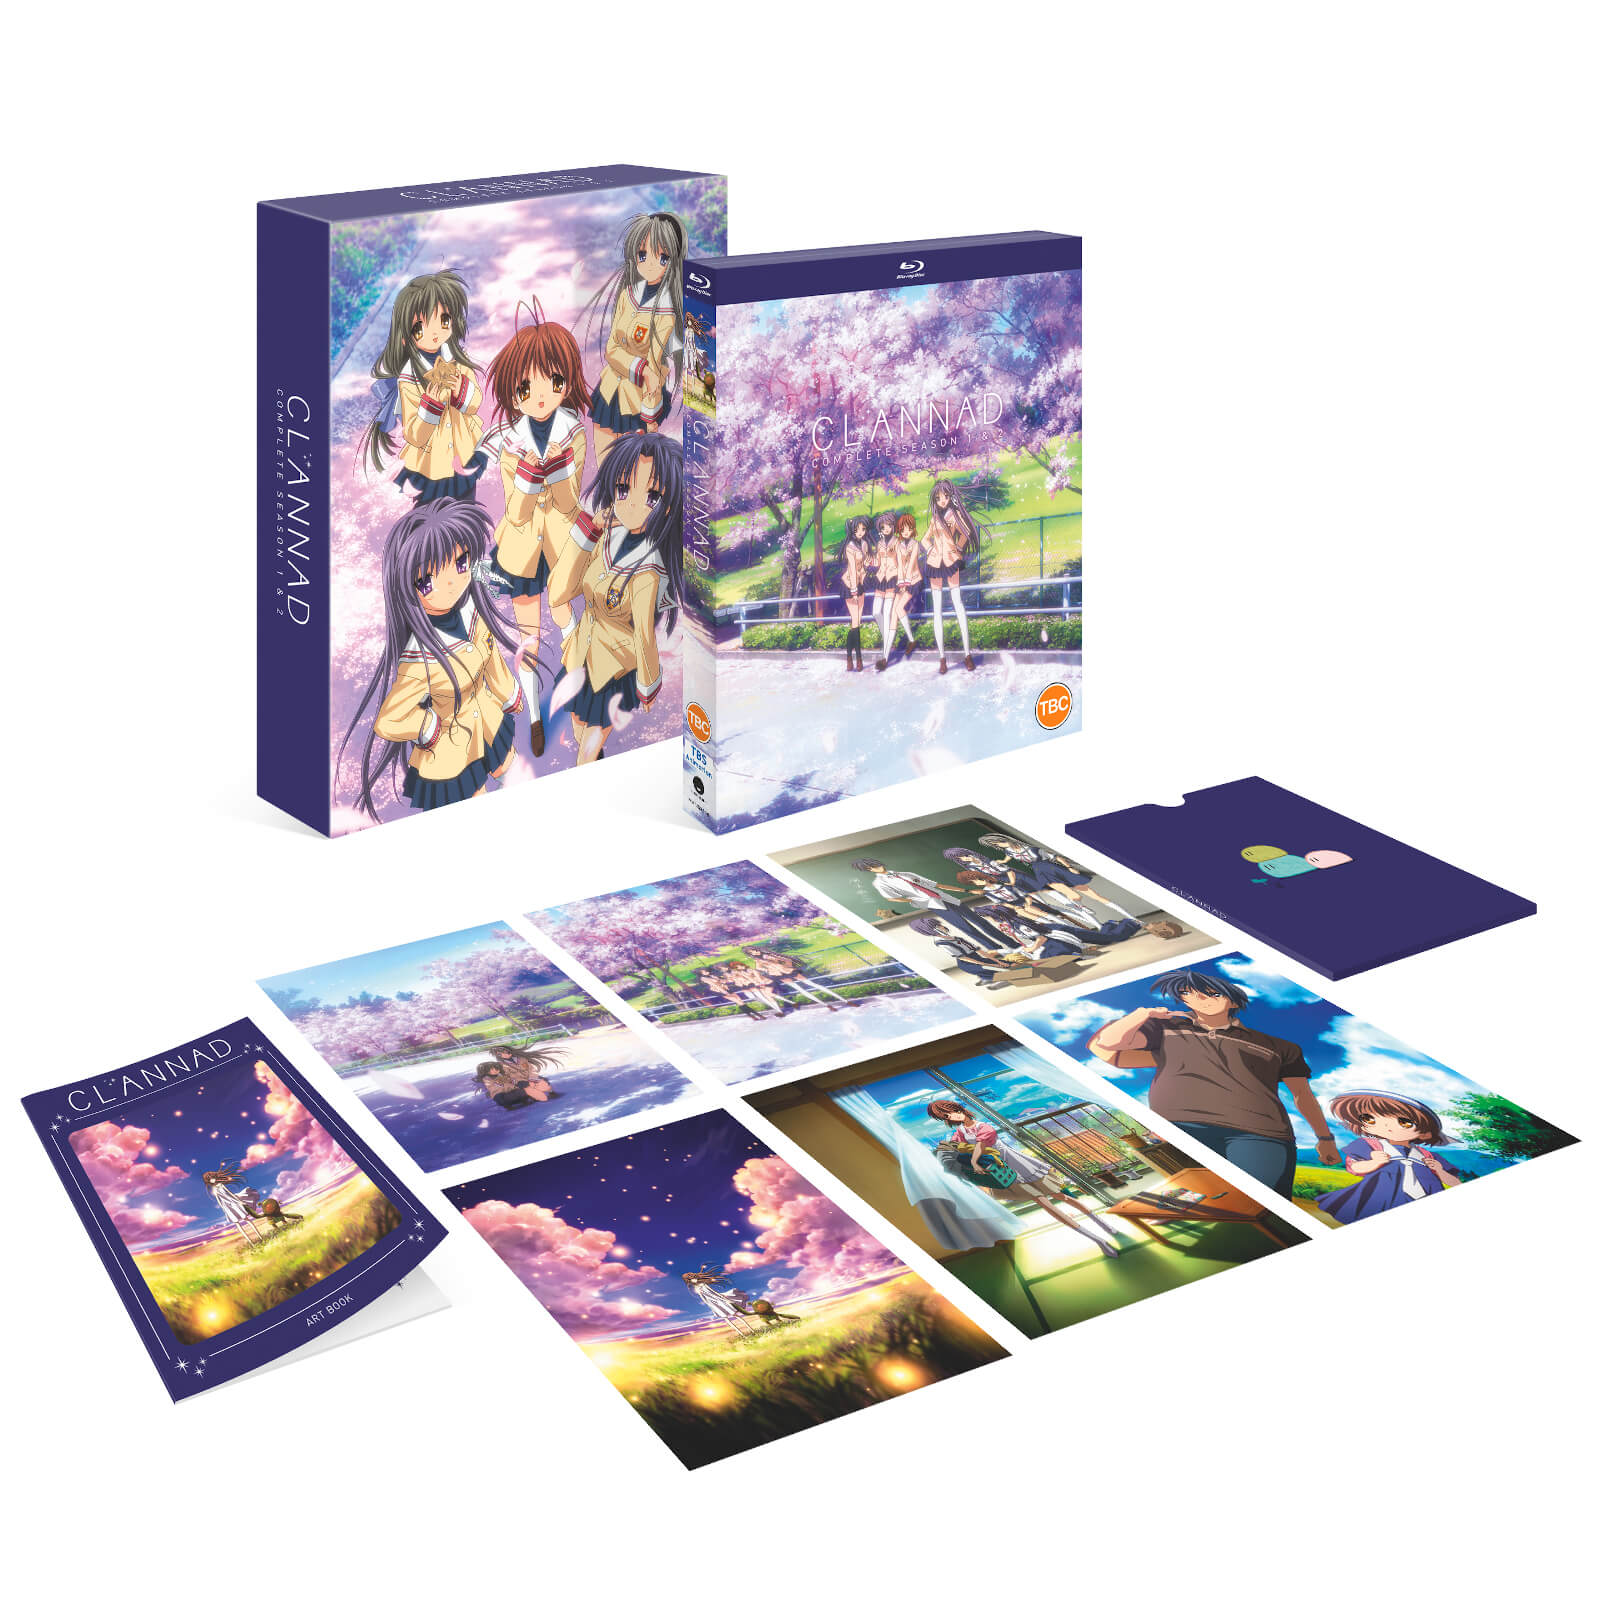 CLANNAD + CLANNAD AFTER STORY Complete Season 1 & 2 Collection (Blu-ray,  Anime)